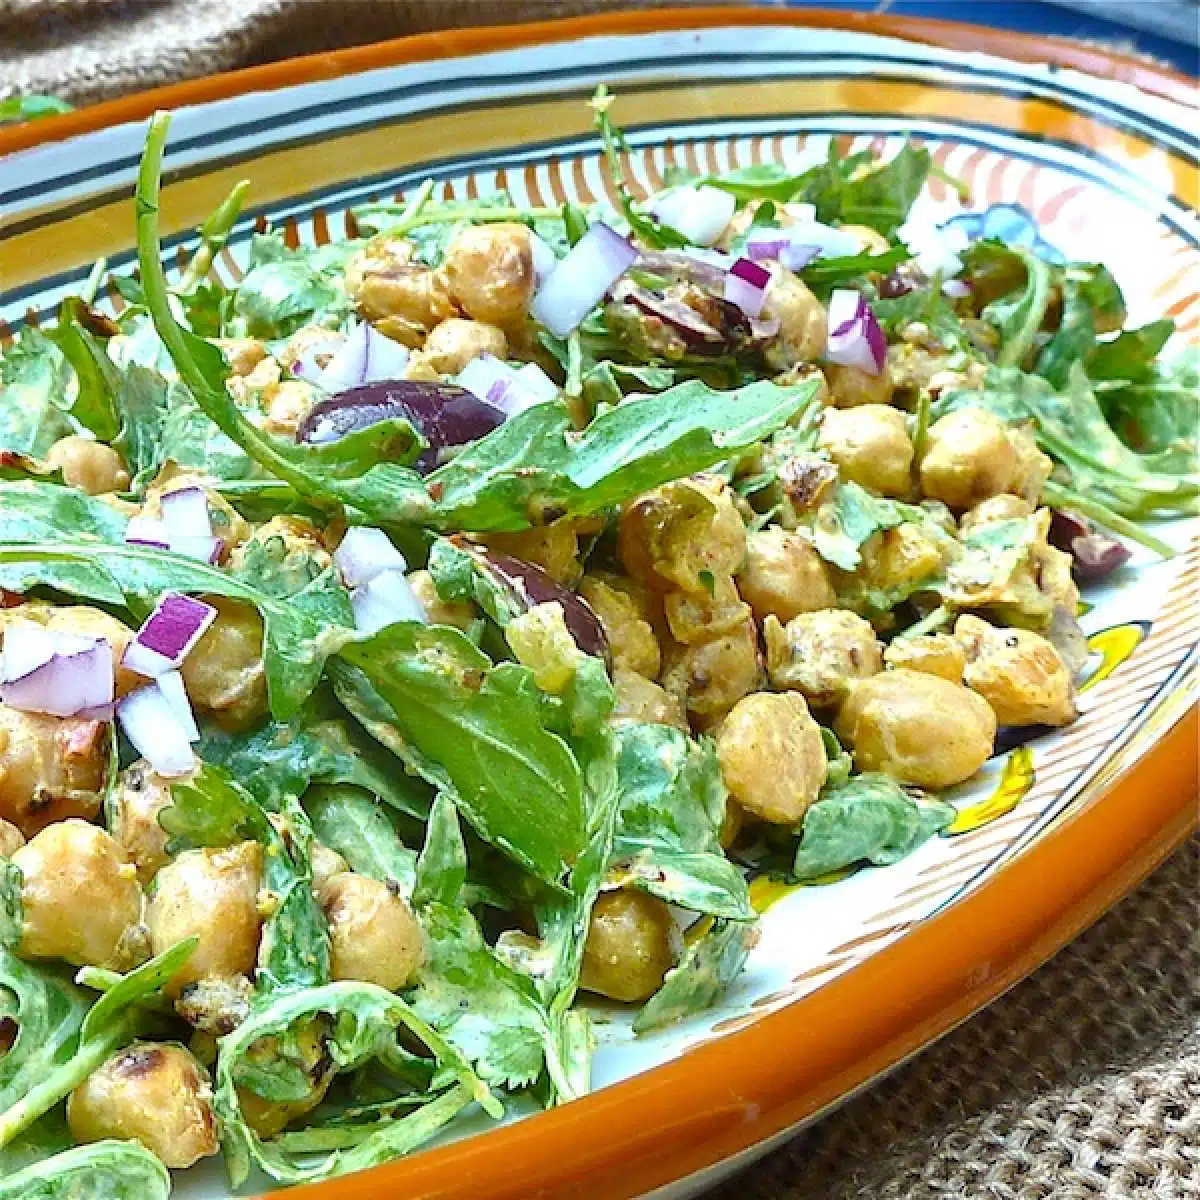 Chickpeas tossed in a yogurt curry dressing with arugula, topped with minced red onion.